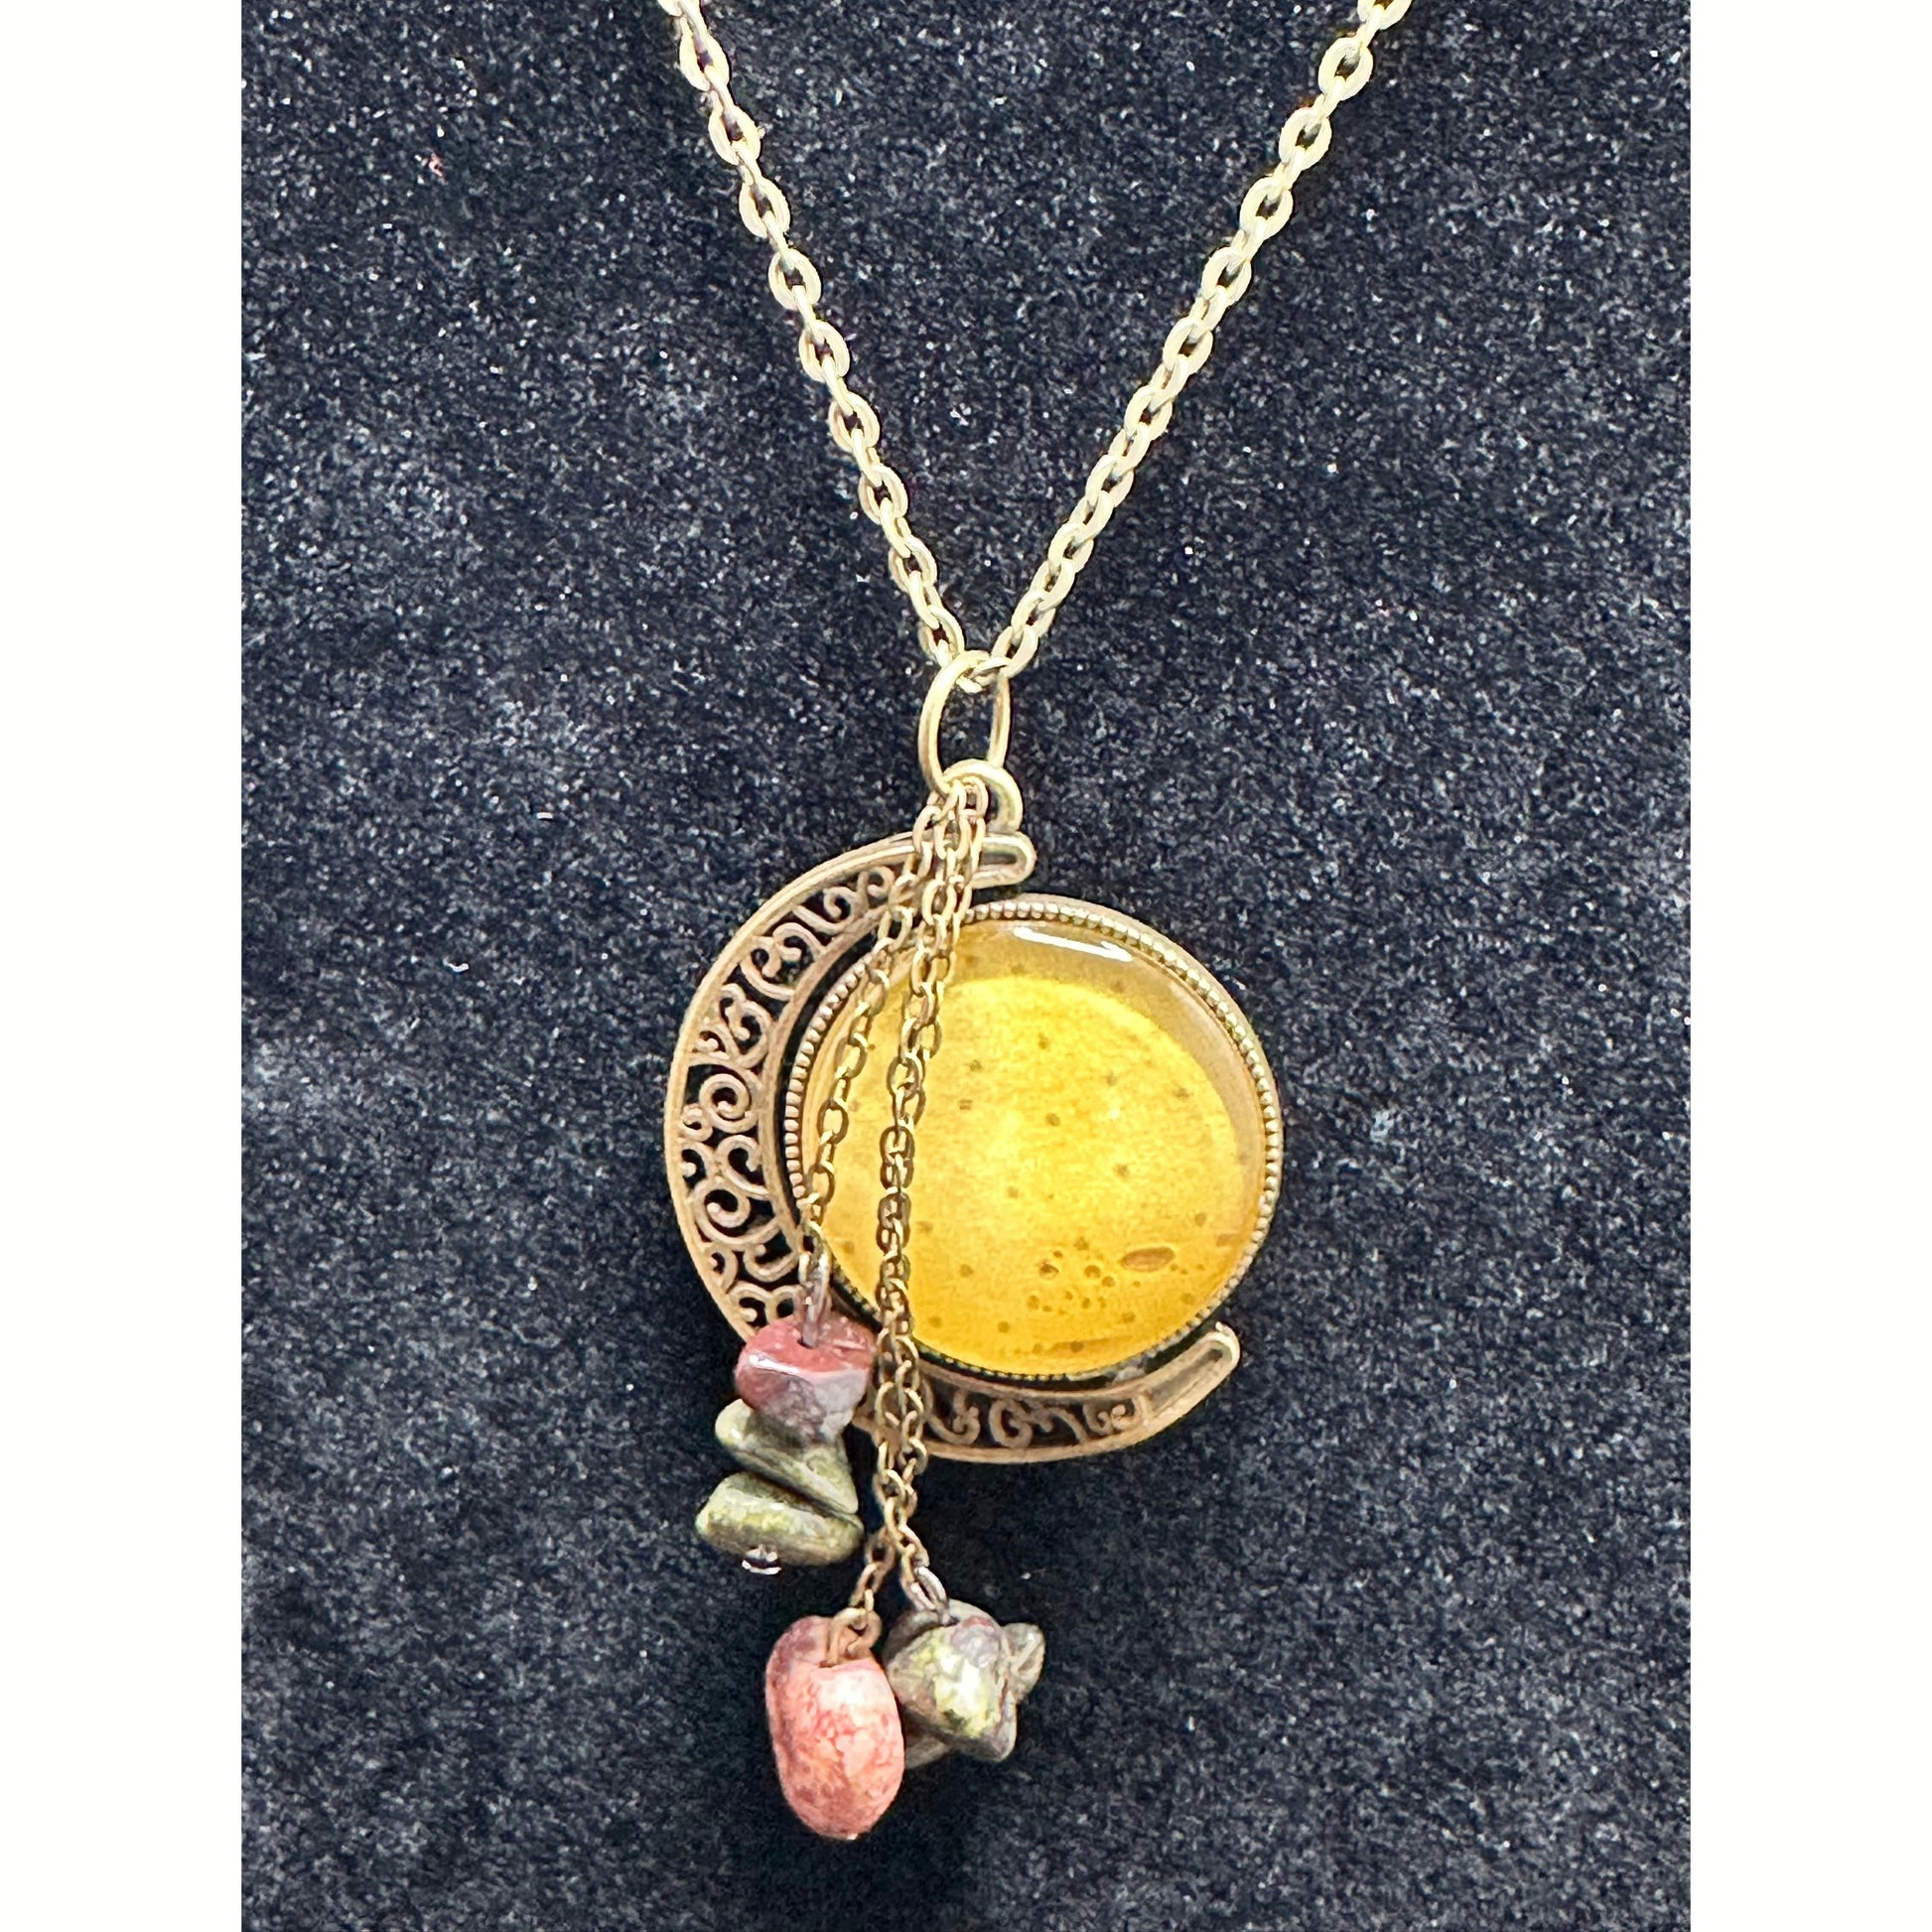 Moonshine 2 Pendant Necklace - Rhapsody and Renascence